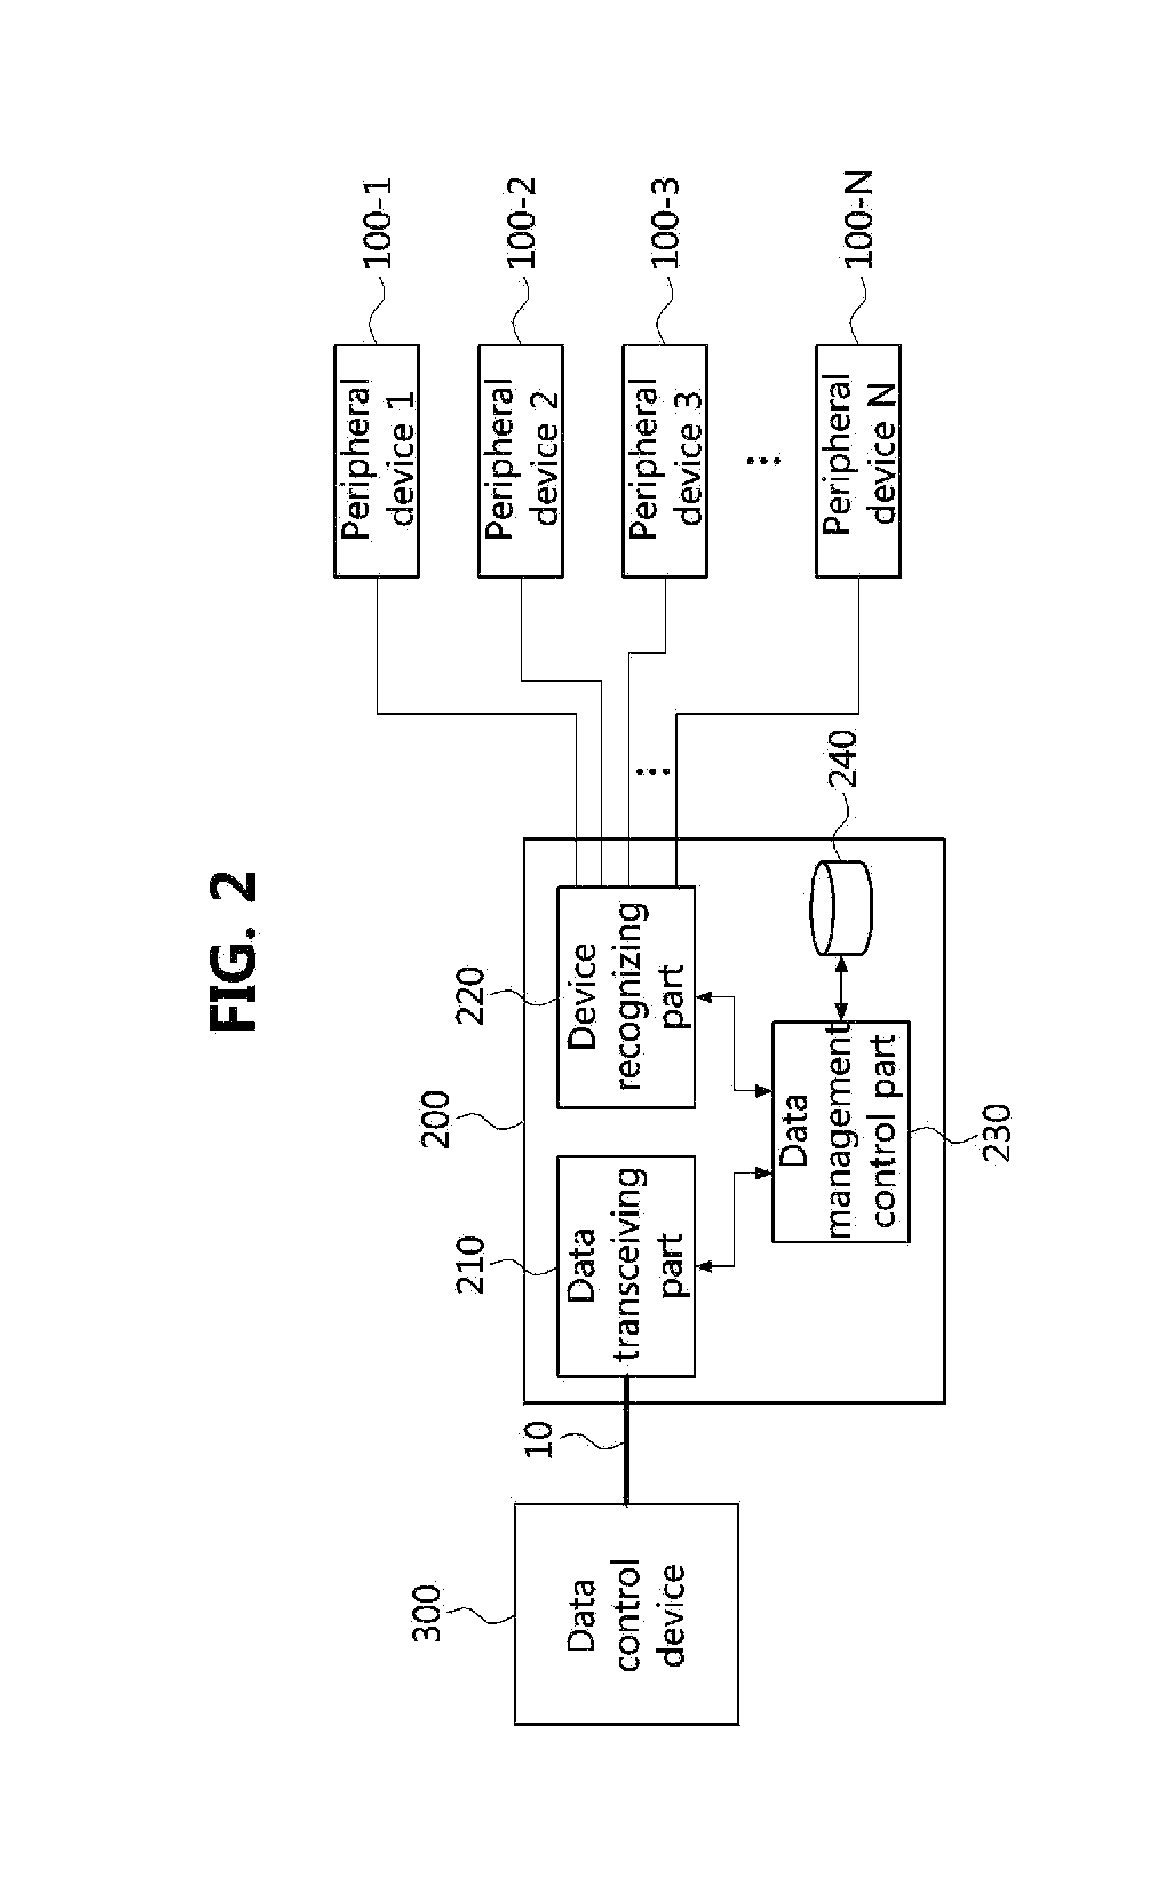 Data management system for controlling a plurality of peripherals and method therefor